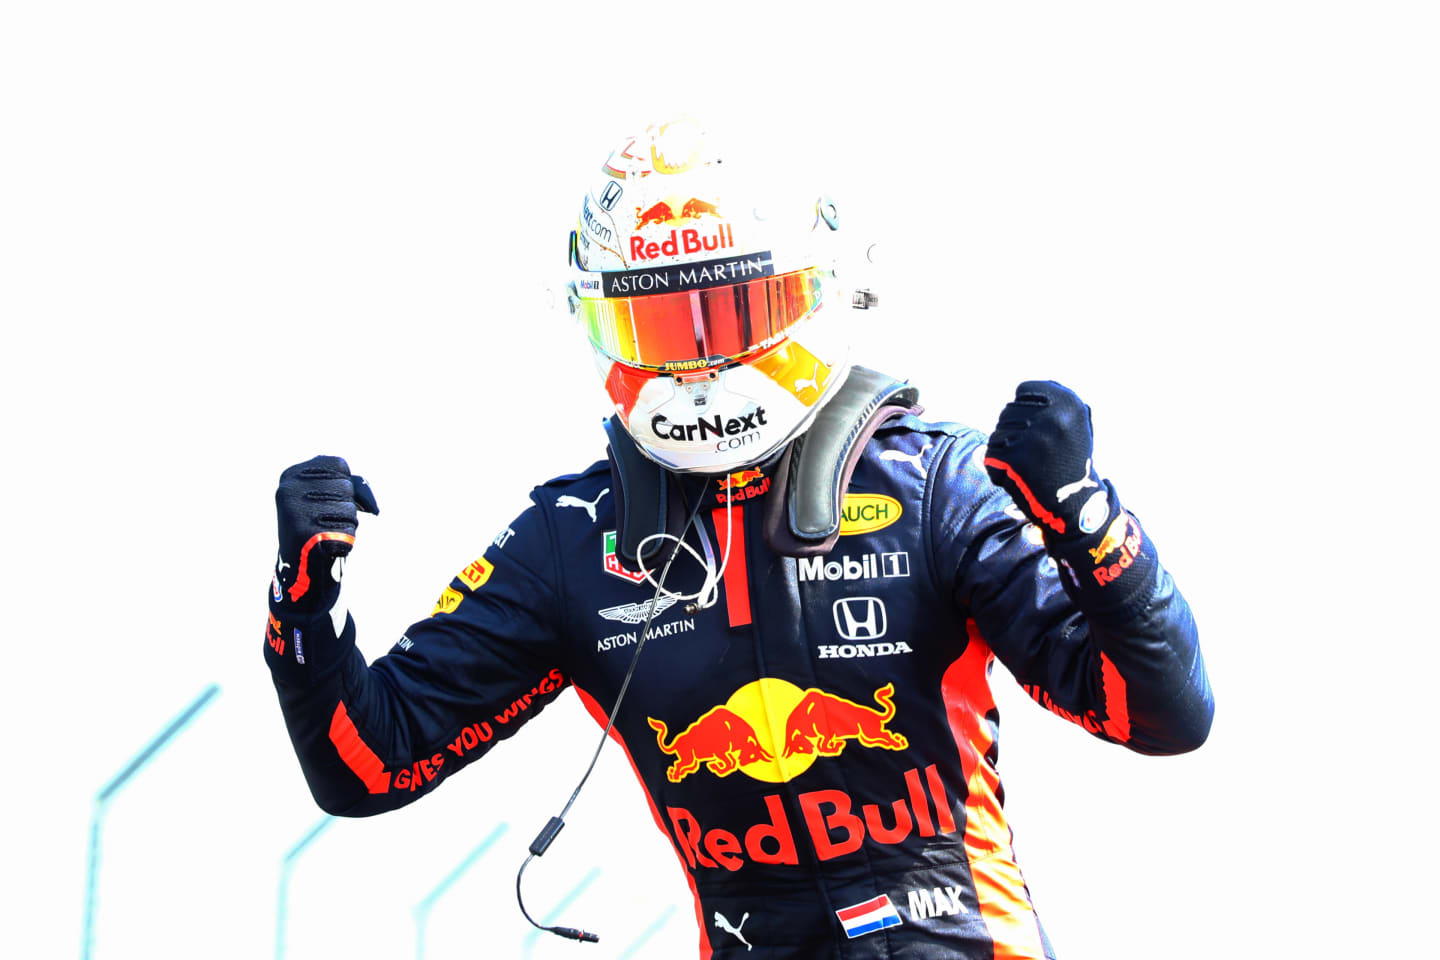 NORTHAMPTON, ENGLAND - AUGUST 09:  Max Verstappen of Netherlands and Red Bull Racing celebrates in parc ferme after winning the F1 70th Anniversary Grand Prix at Silverstone on August 09, 2020 in Northampton, England. (Photo by Dan Istitene - Formula 1/Formula 1 via Getty Images)